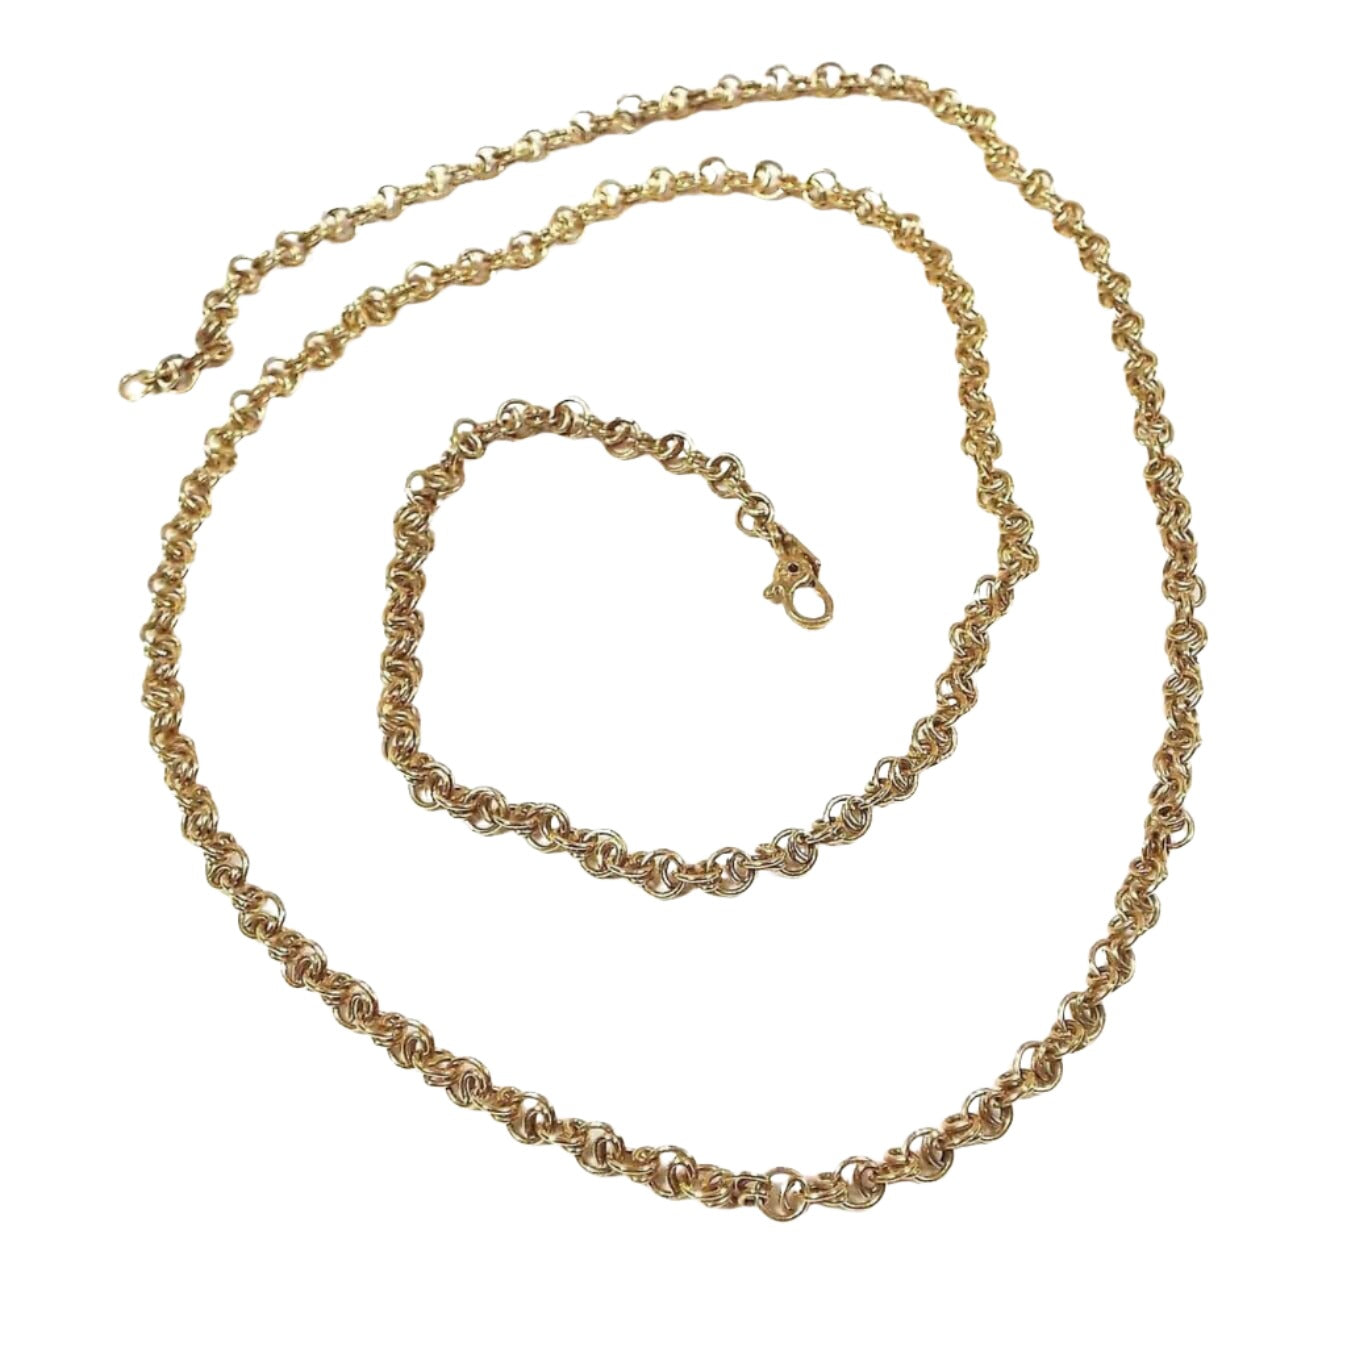 Top view of the retro vintage Monet chain necklace. The metal is gold tone in color. The links on the chain are a fancy round double curved link for a coiled appearance. They are linked together cable chain style. There is a hinged clip clasp and a rectangle hang tag with Monet on it at the end.